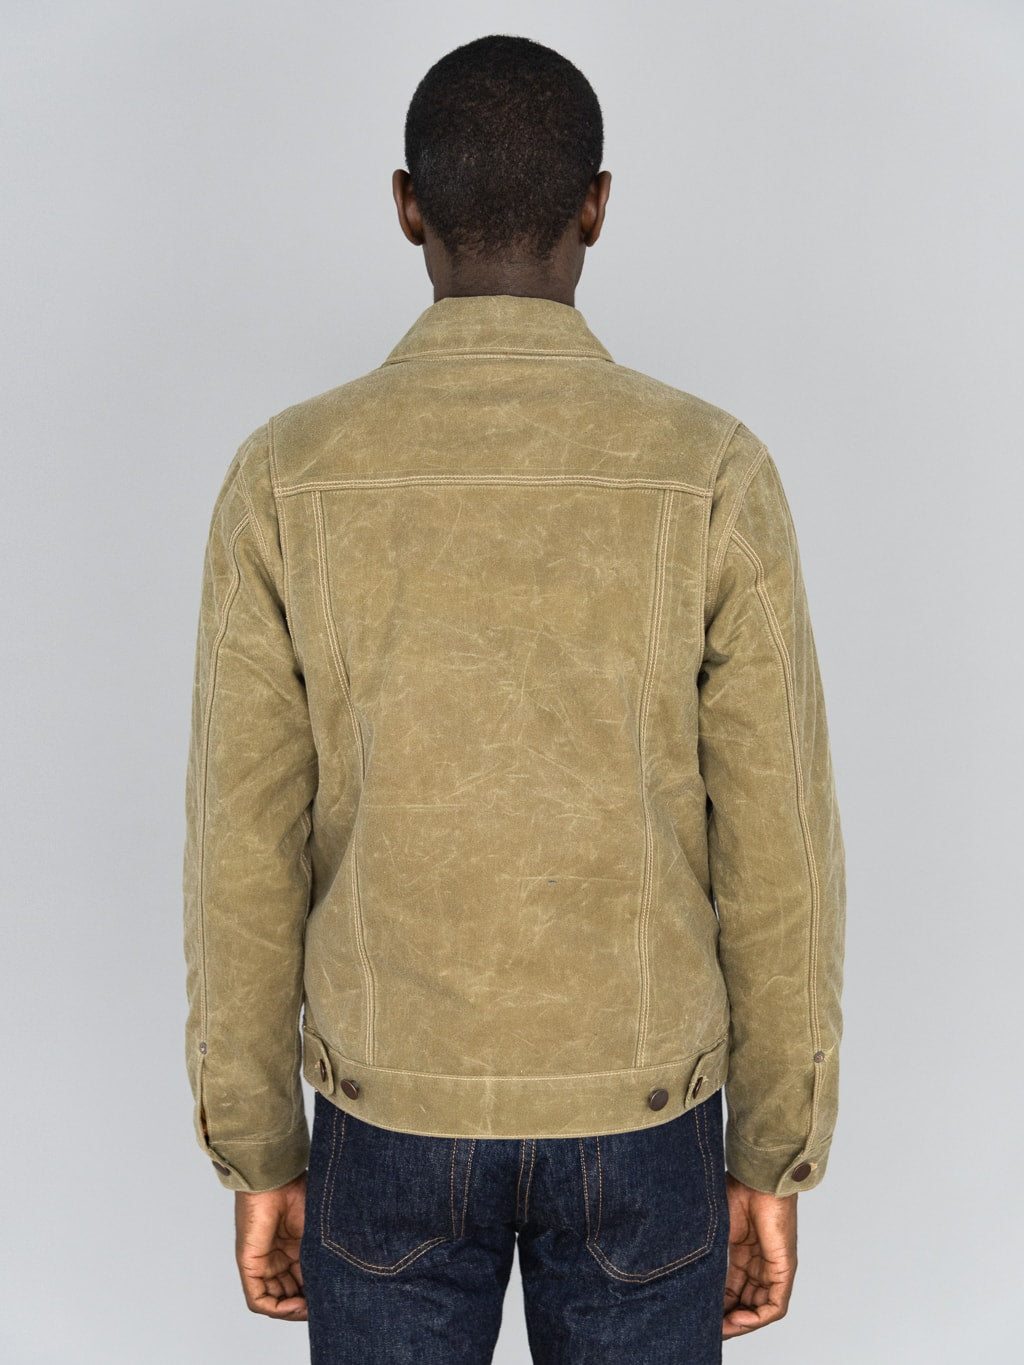 Freenote Cloth Riders Jacket Waxed Canvas Tobacco model back fit